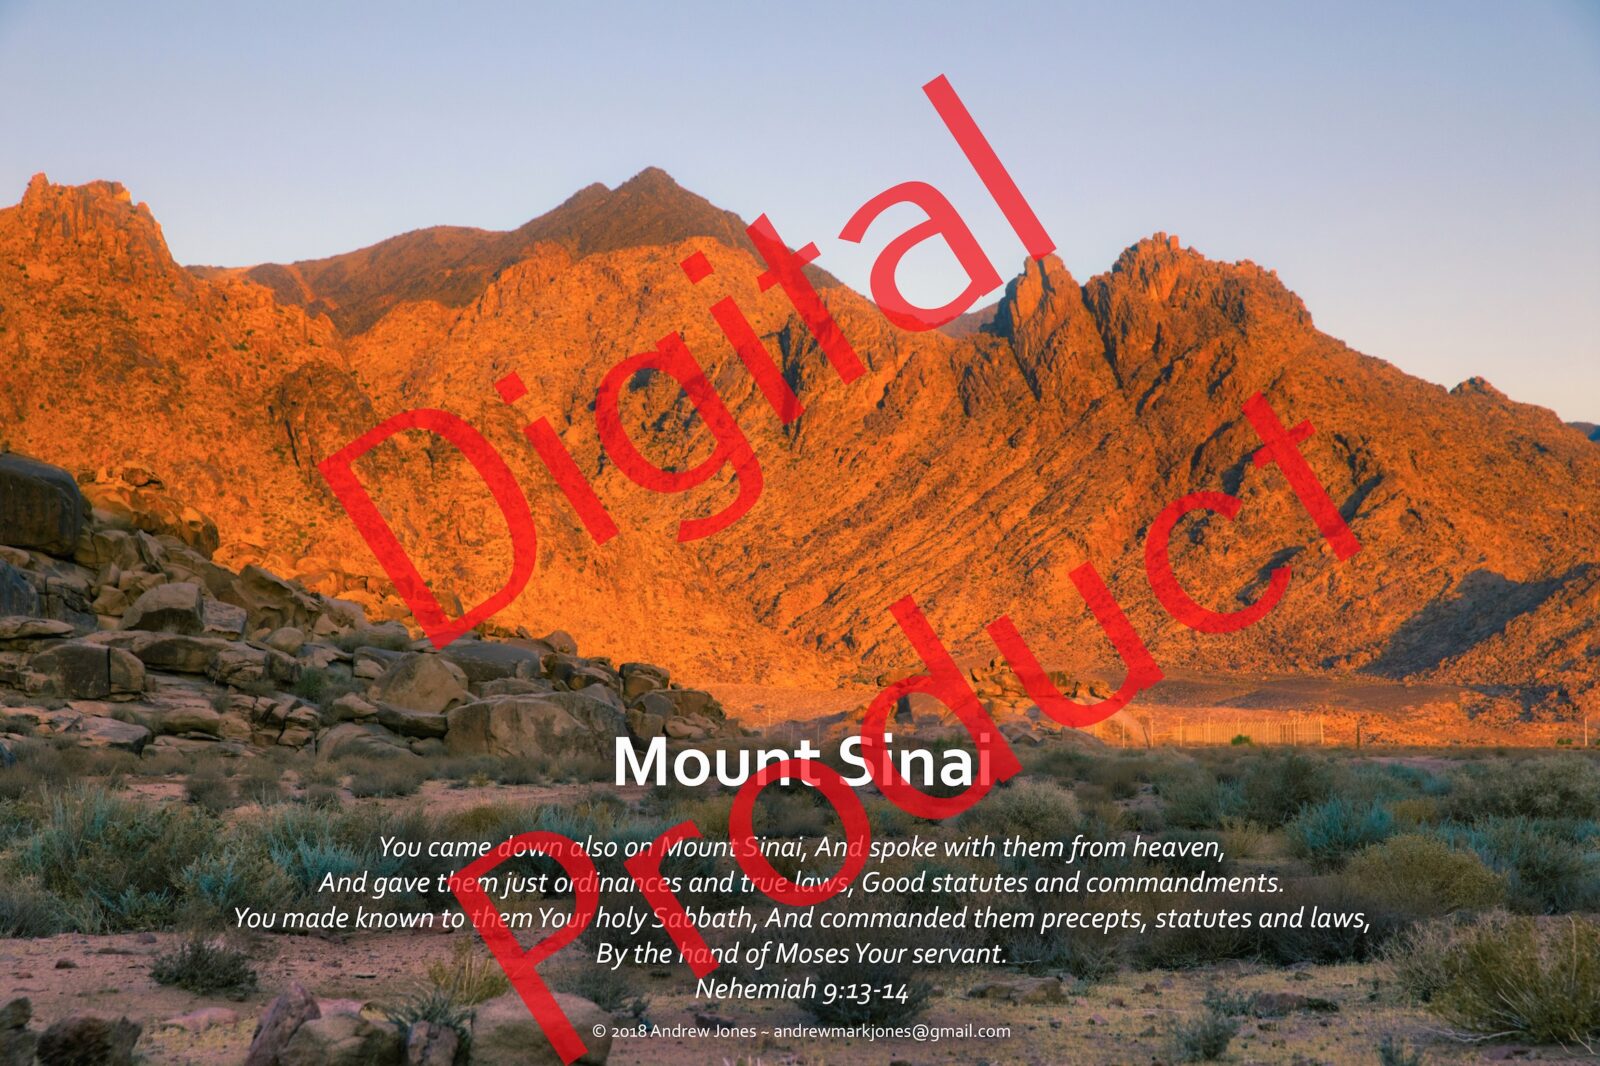 8 Poster Set Mount Sinai Only Posters (DIGITAL) Discovered Sinai